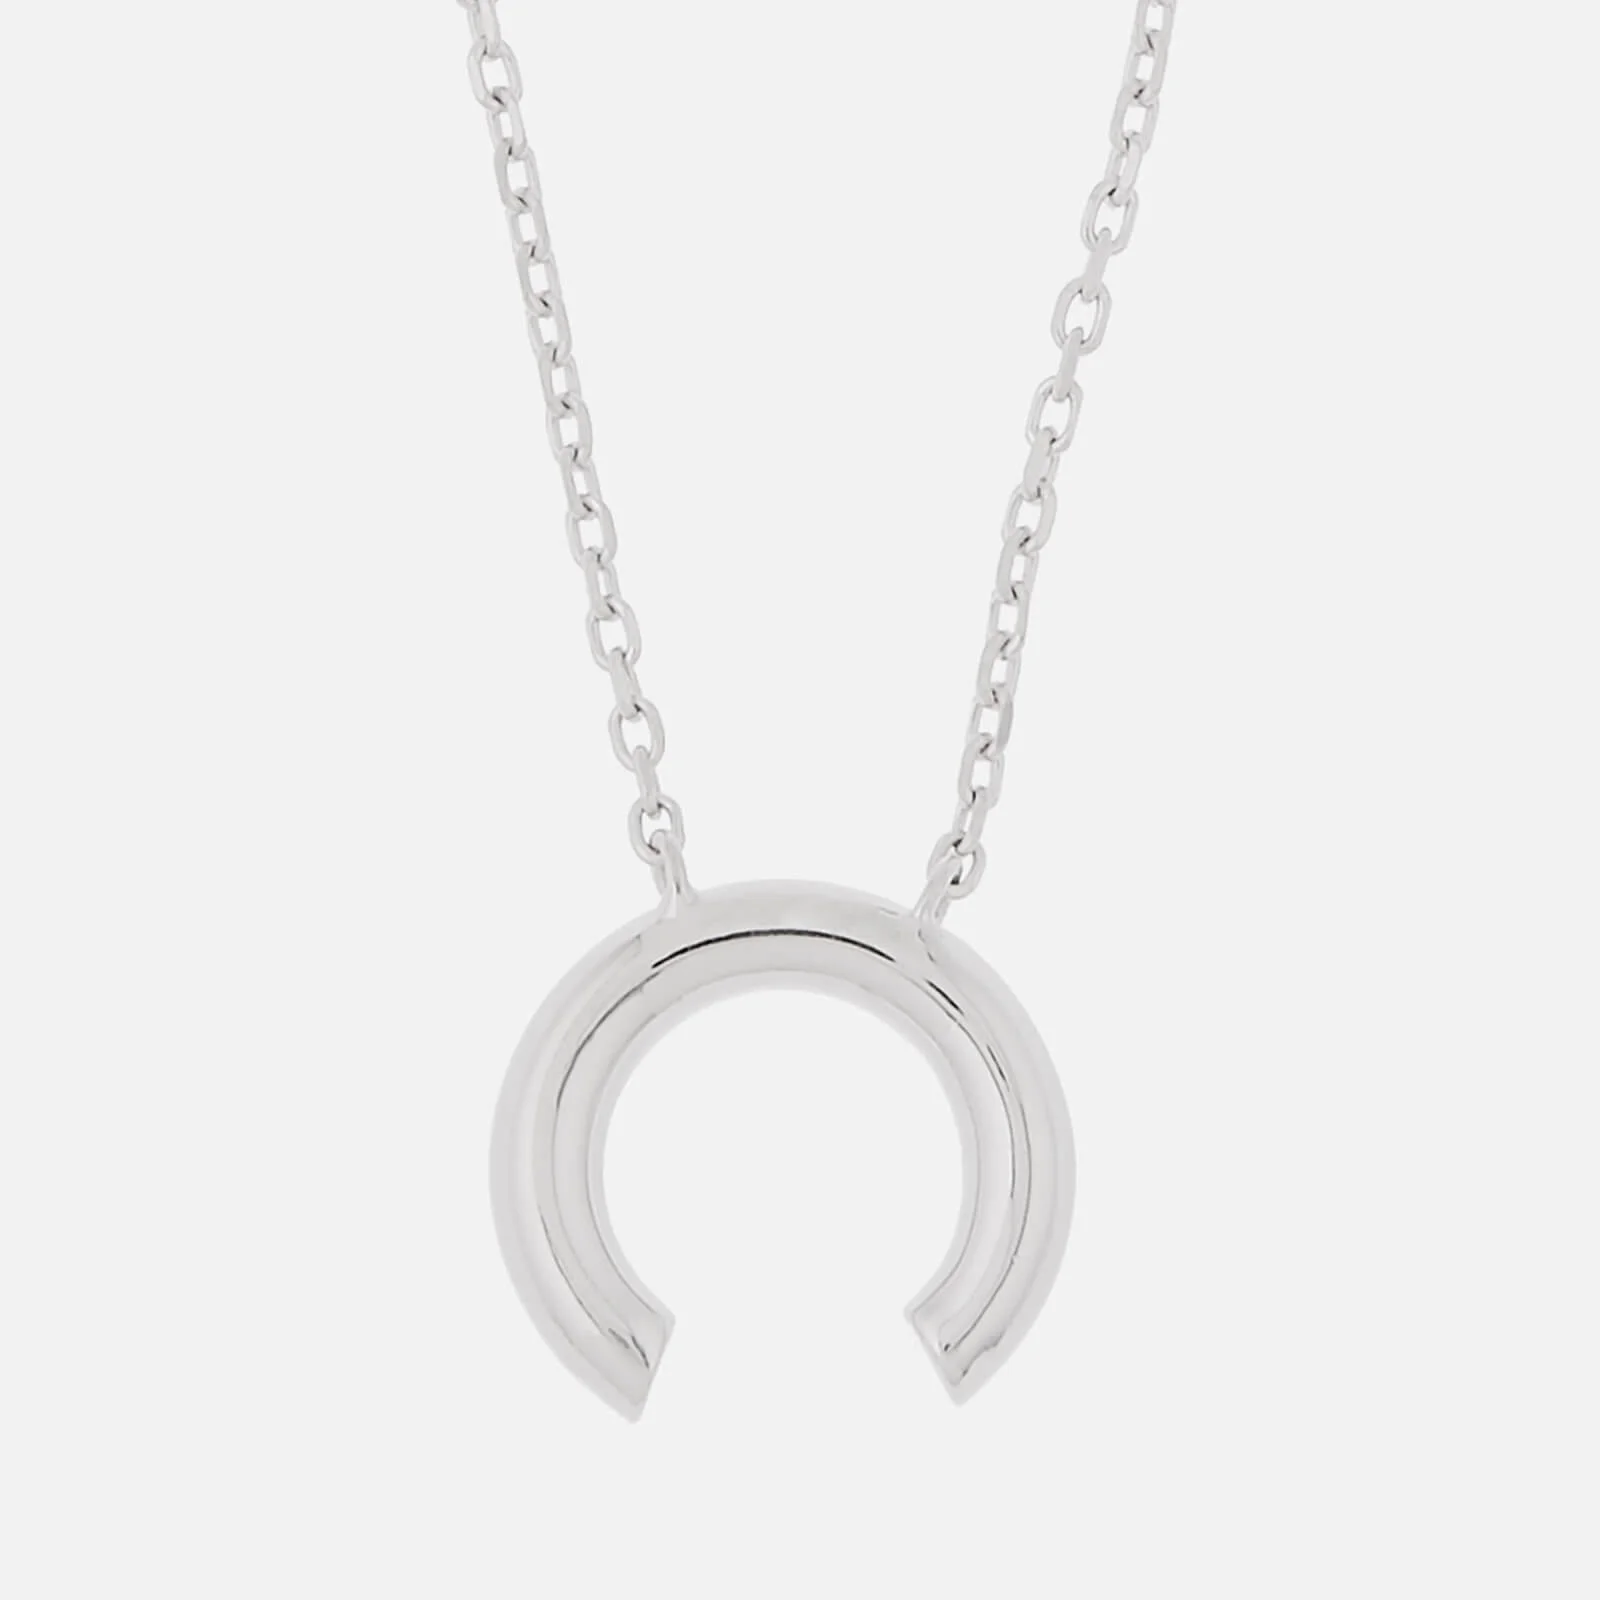 Maria Black Women's Disrupted Necklace - Silver Image 1